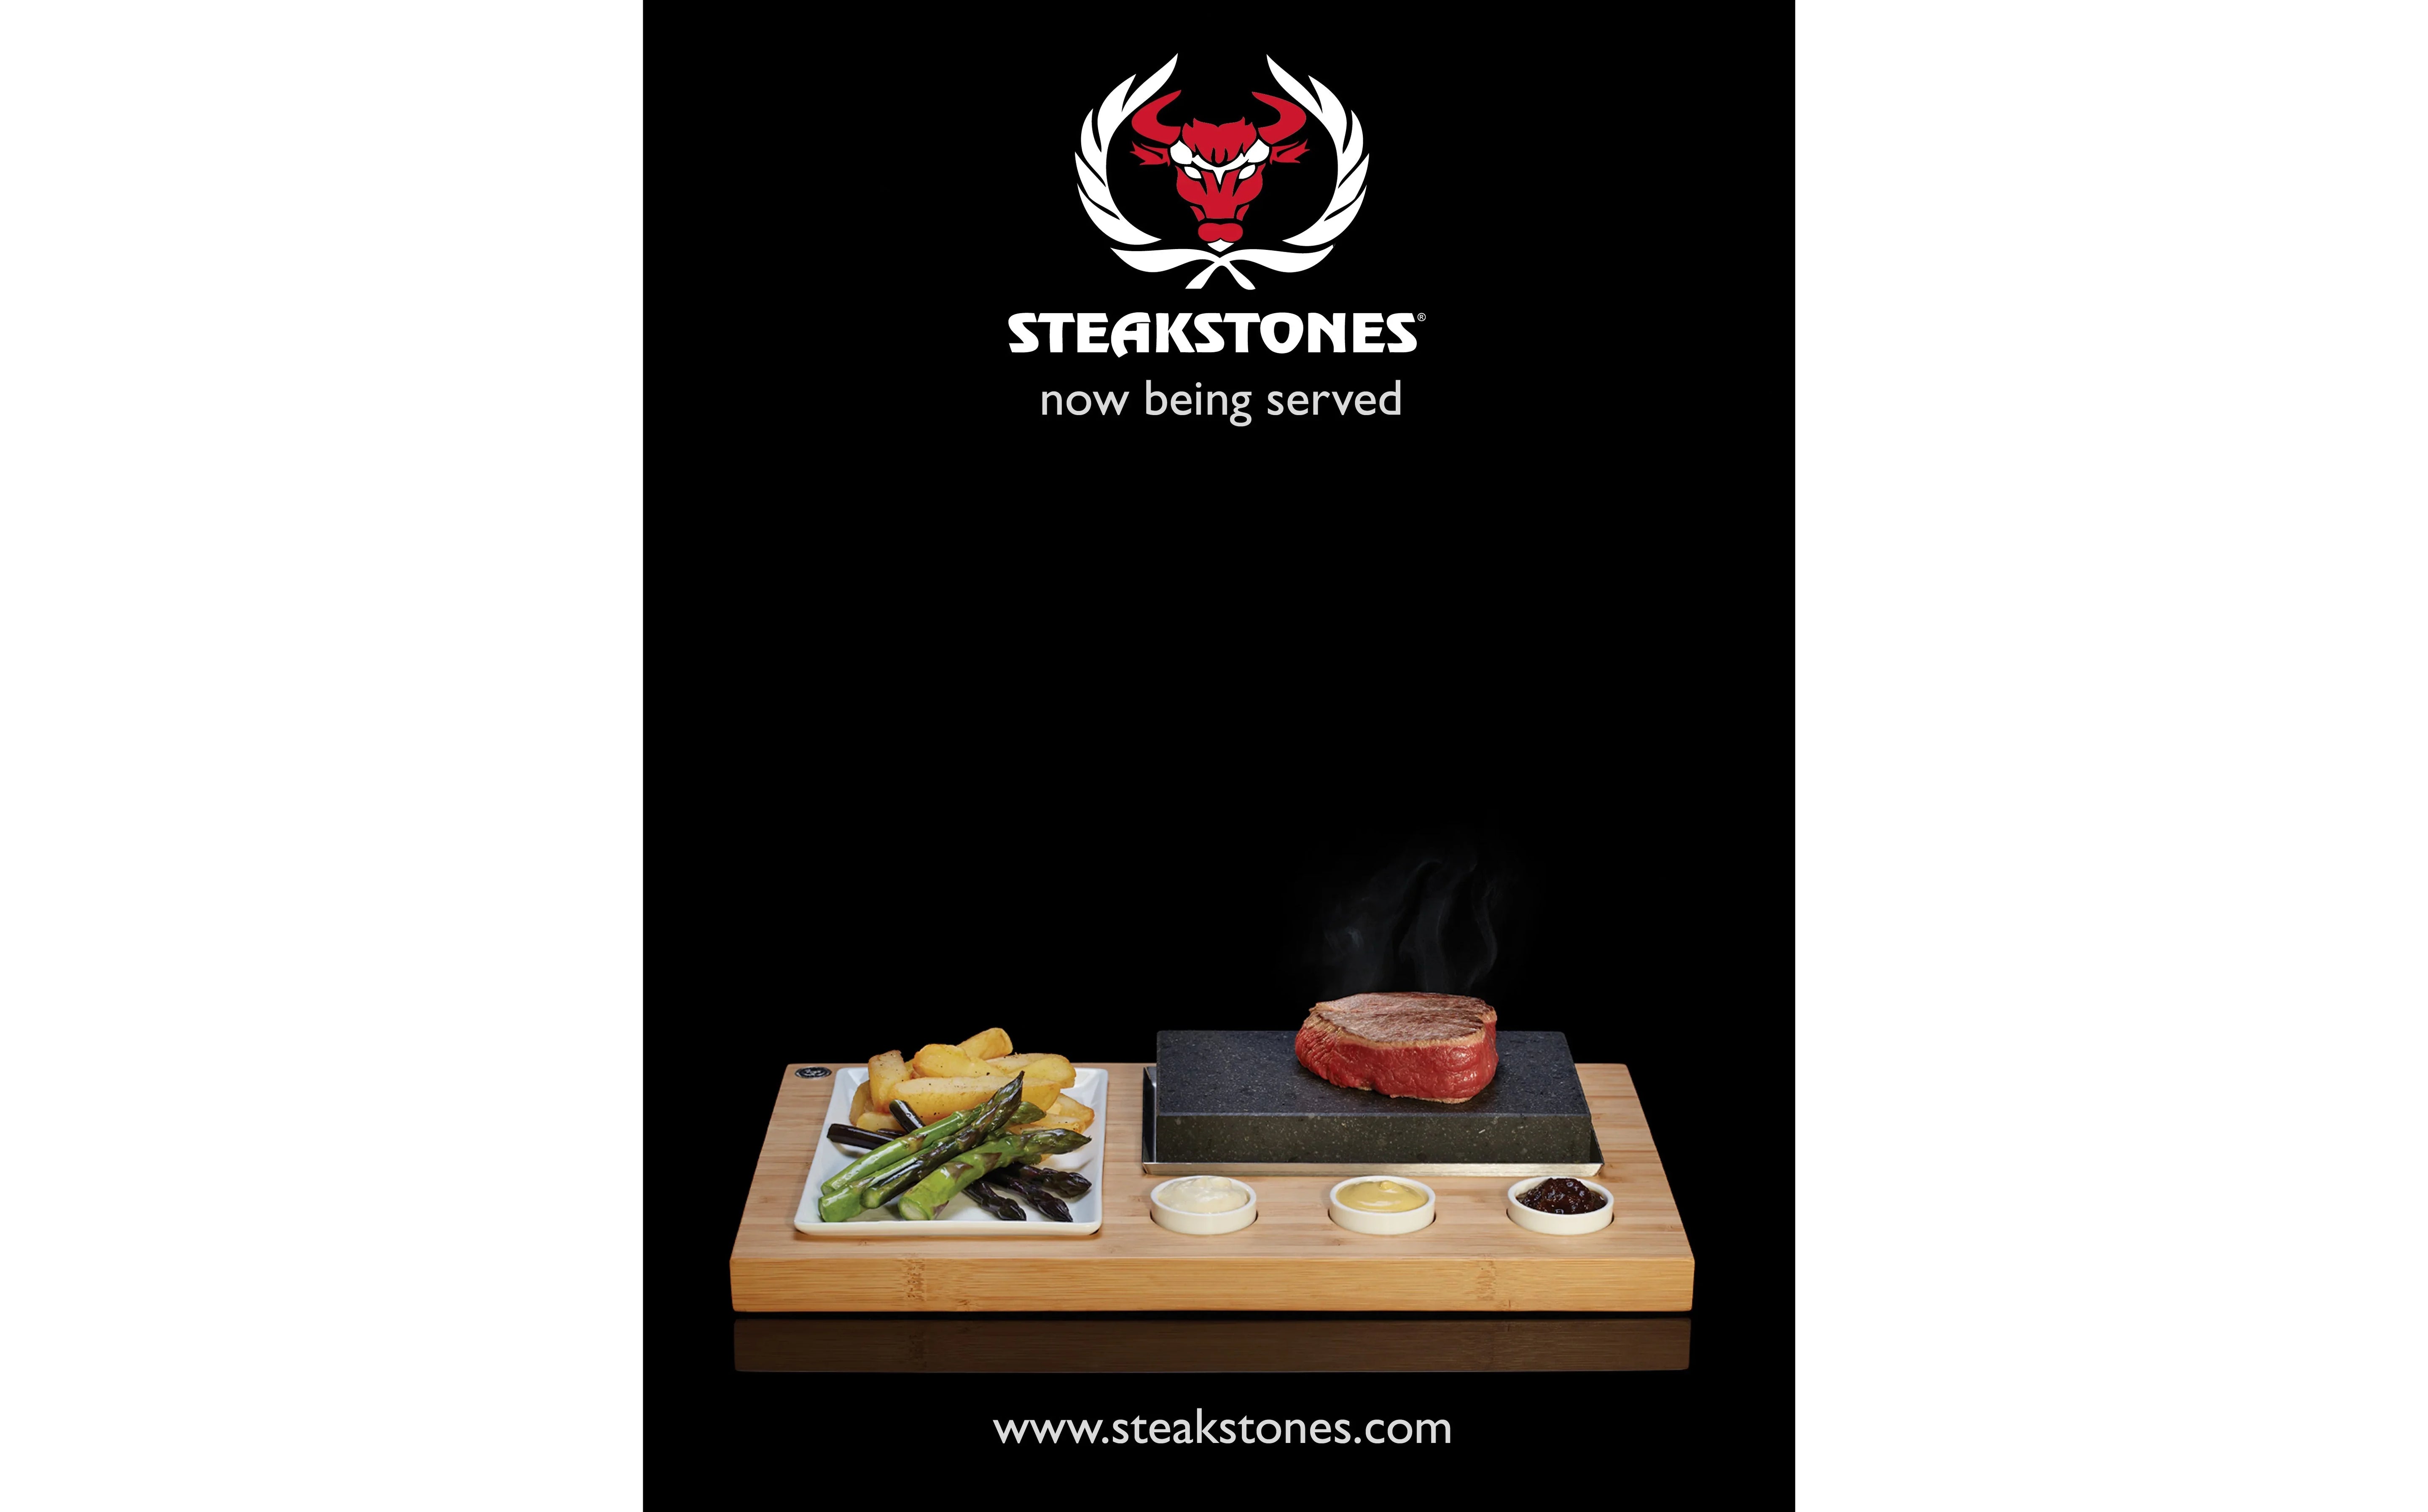 SteakStones Promotional Posters A1